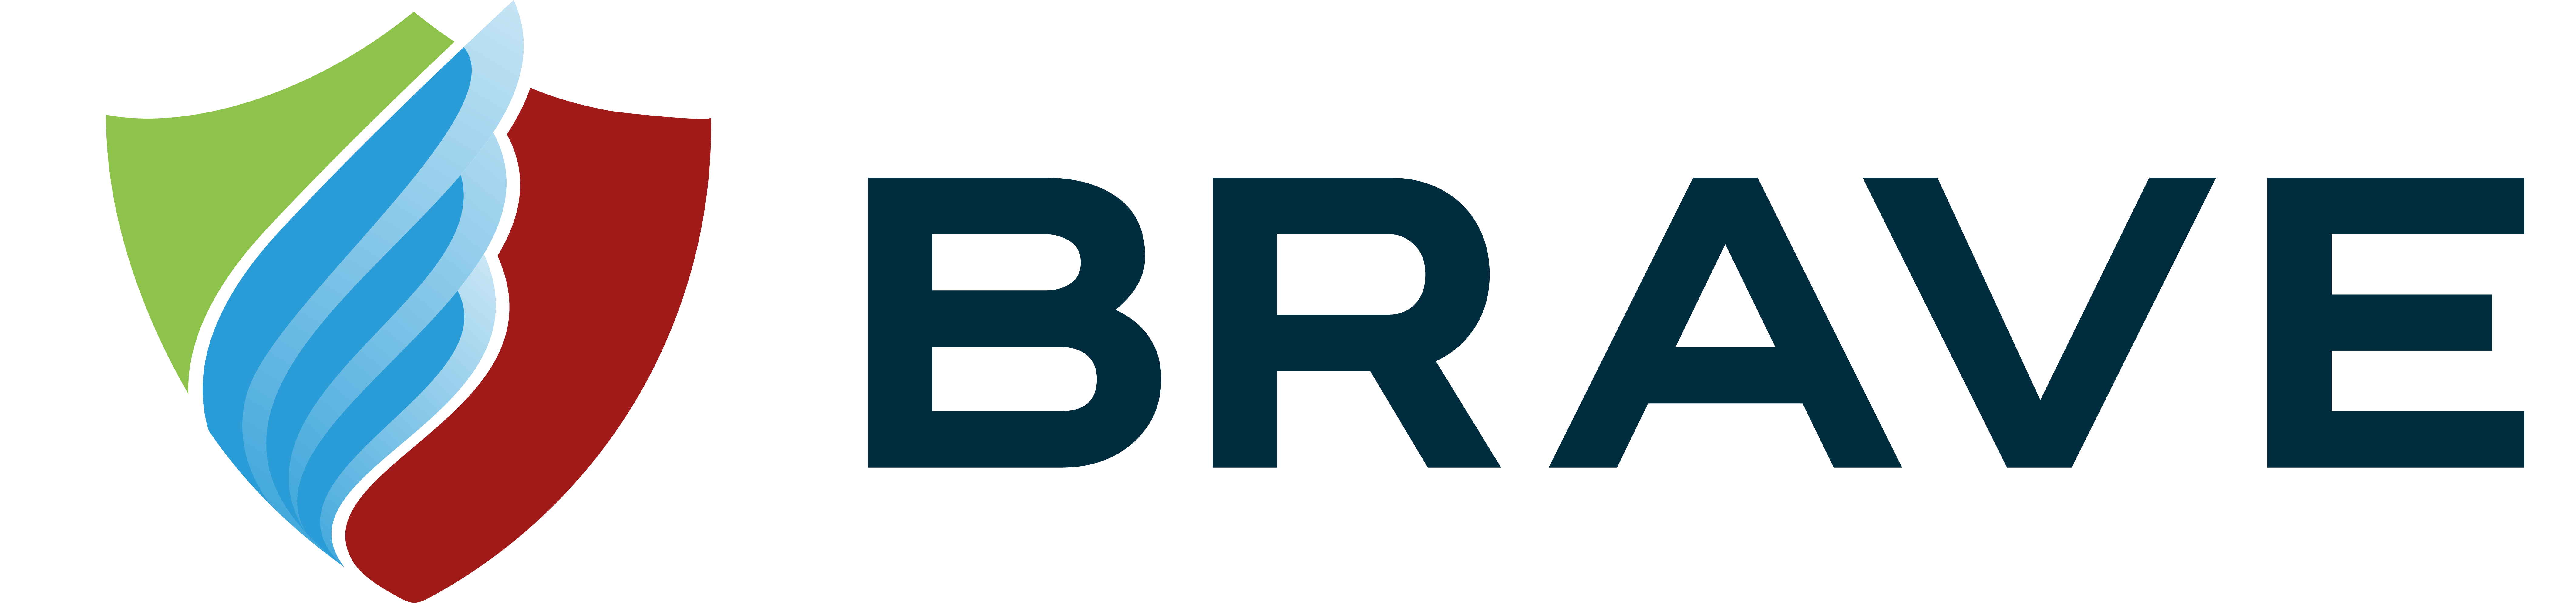 Brave logo consisting of a three color shield with a blue wing in the center, green on the left and red on the right of the shield, Brave text in black is to the right